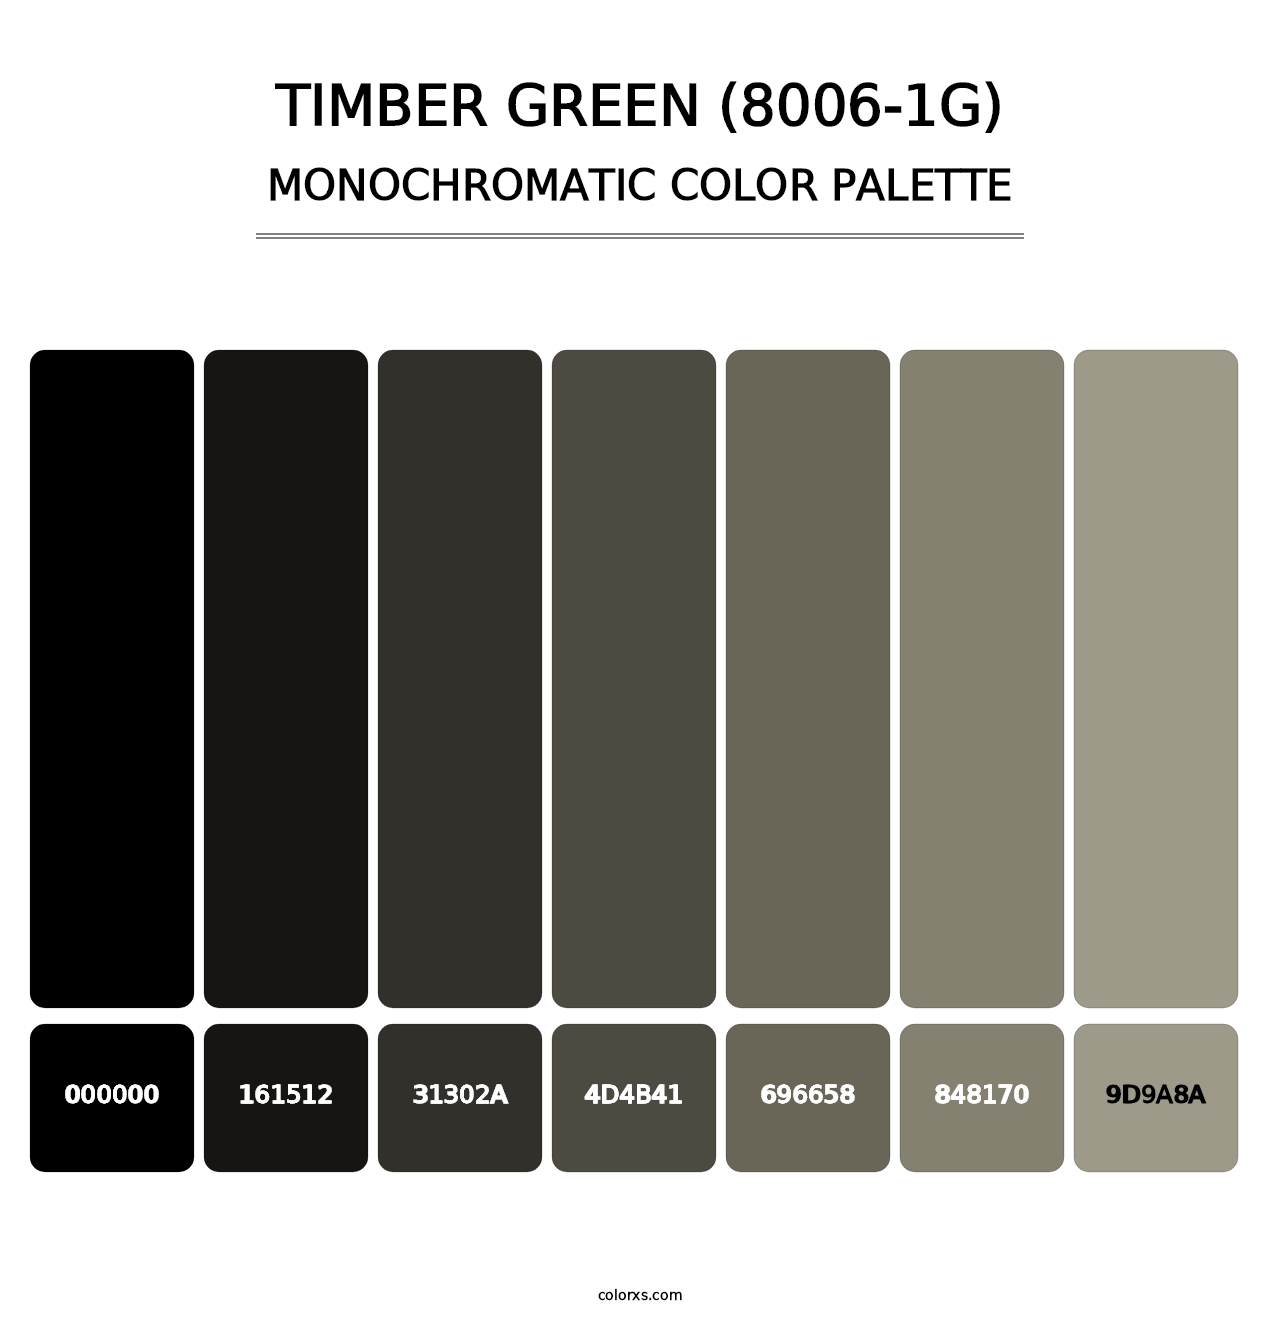 Timber Green (8006-1G) - Monochromatic Color Palette